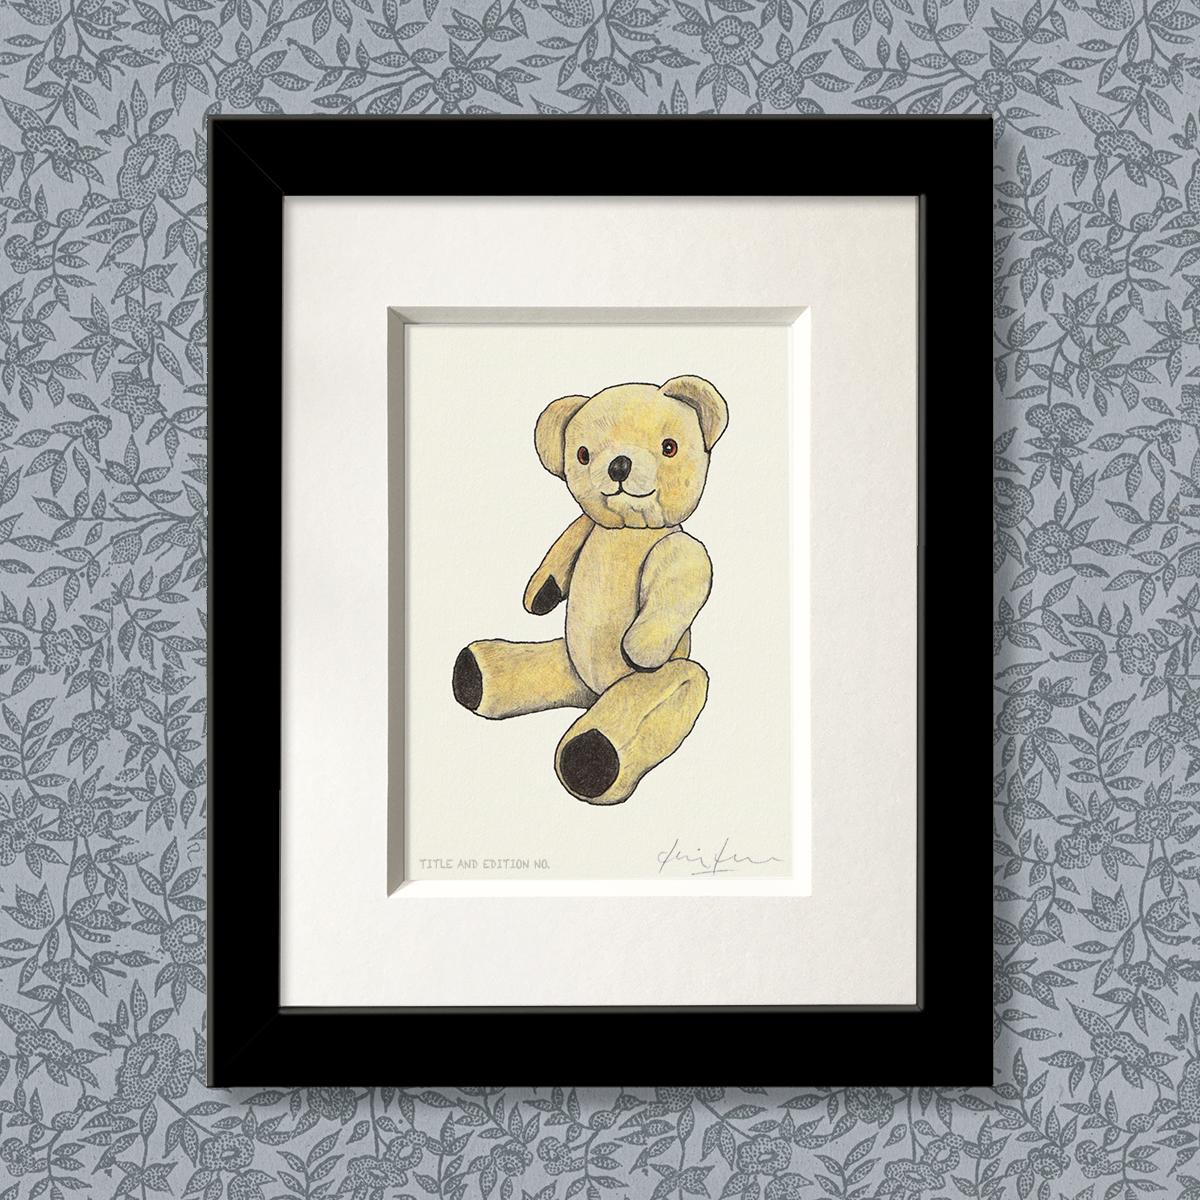 Limited edition print from a pen, ink and coloured pencil drawing of a Teddy Bear in a black frame